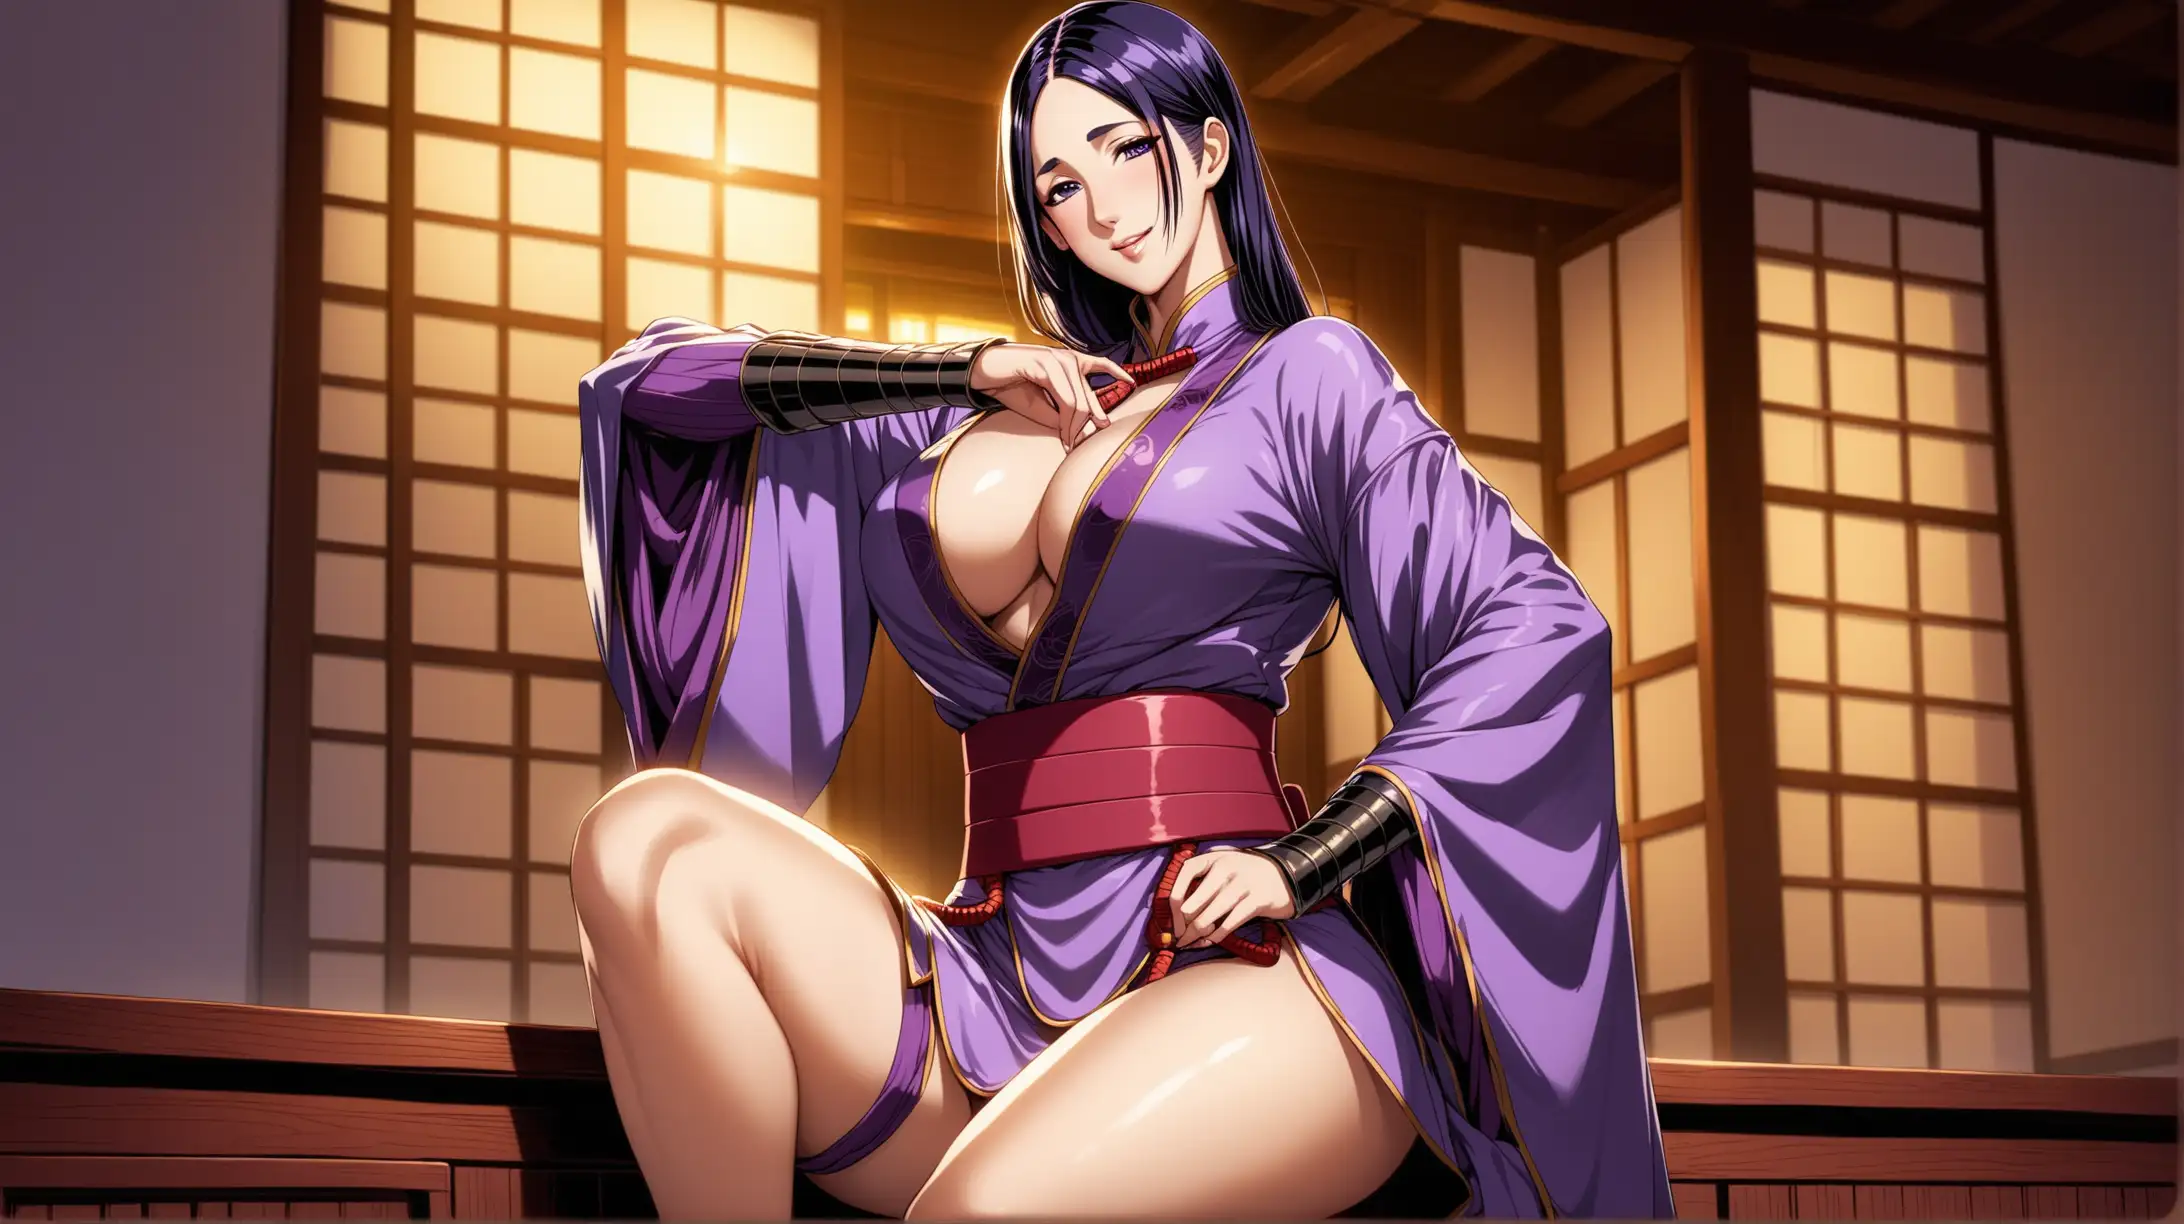 Draw the character Minamoto no Raikou, high quality, ambient lighting, long shot, indoors, in a seductive pose, wearing a fun western fashion outfit, smiling at the viewer